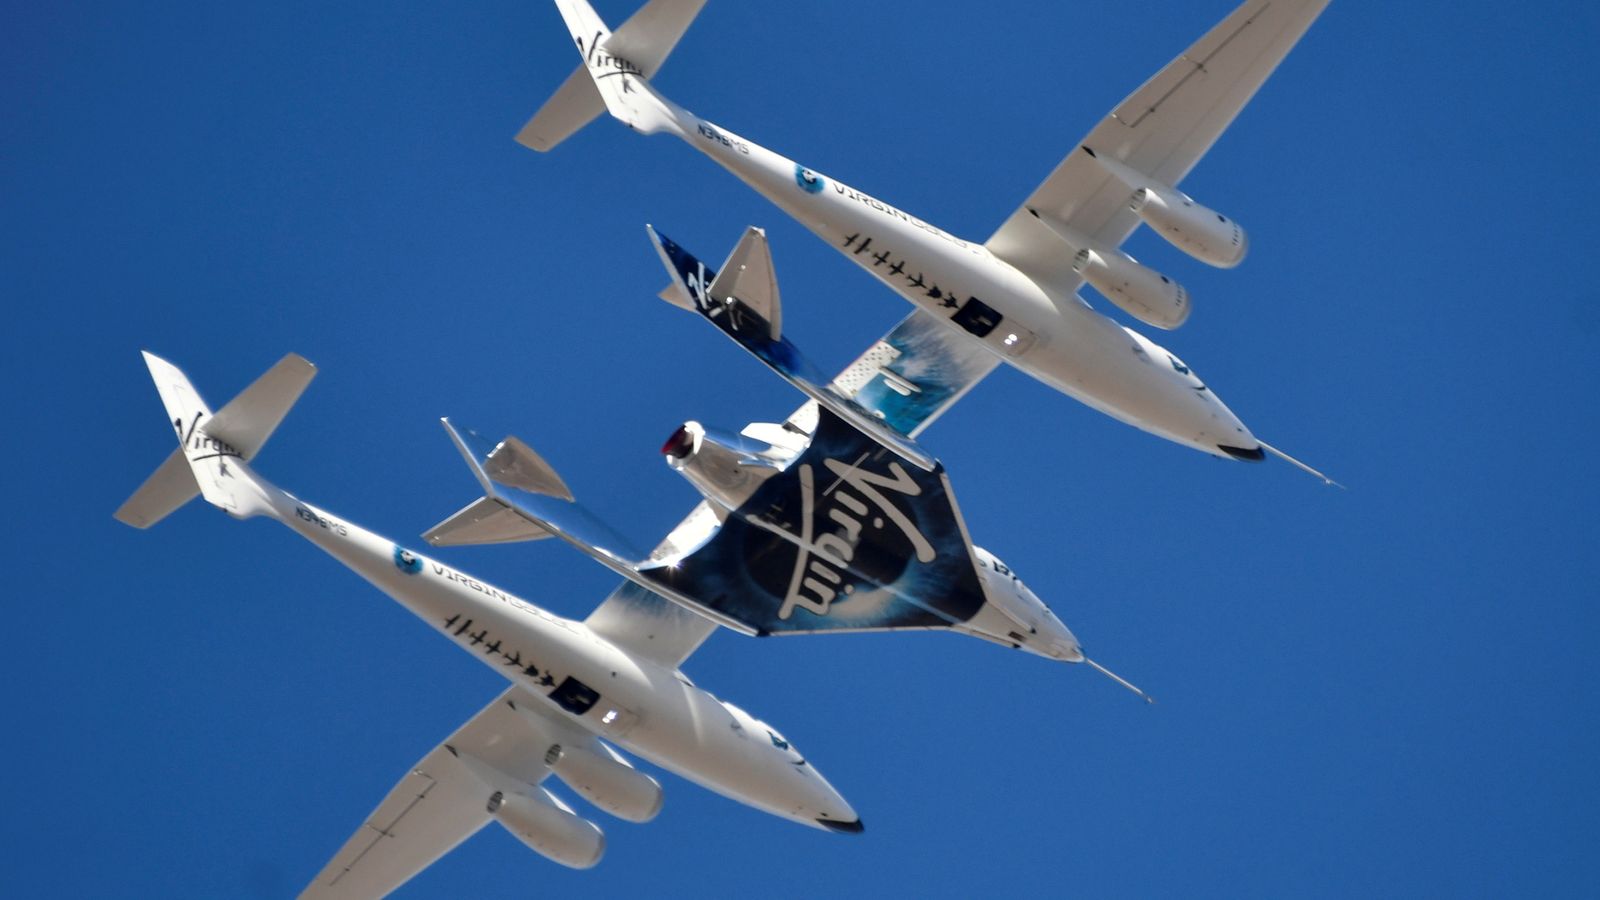 Virgin Galactic's first commercial space flight launches what happens